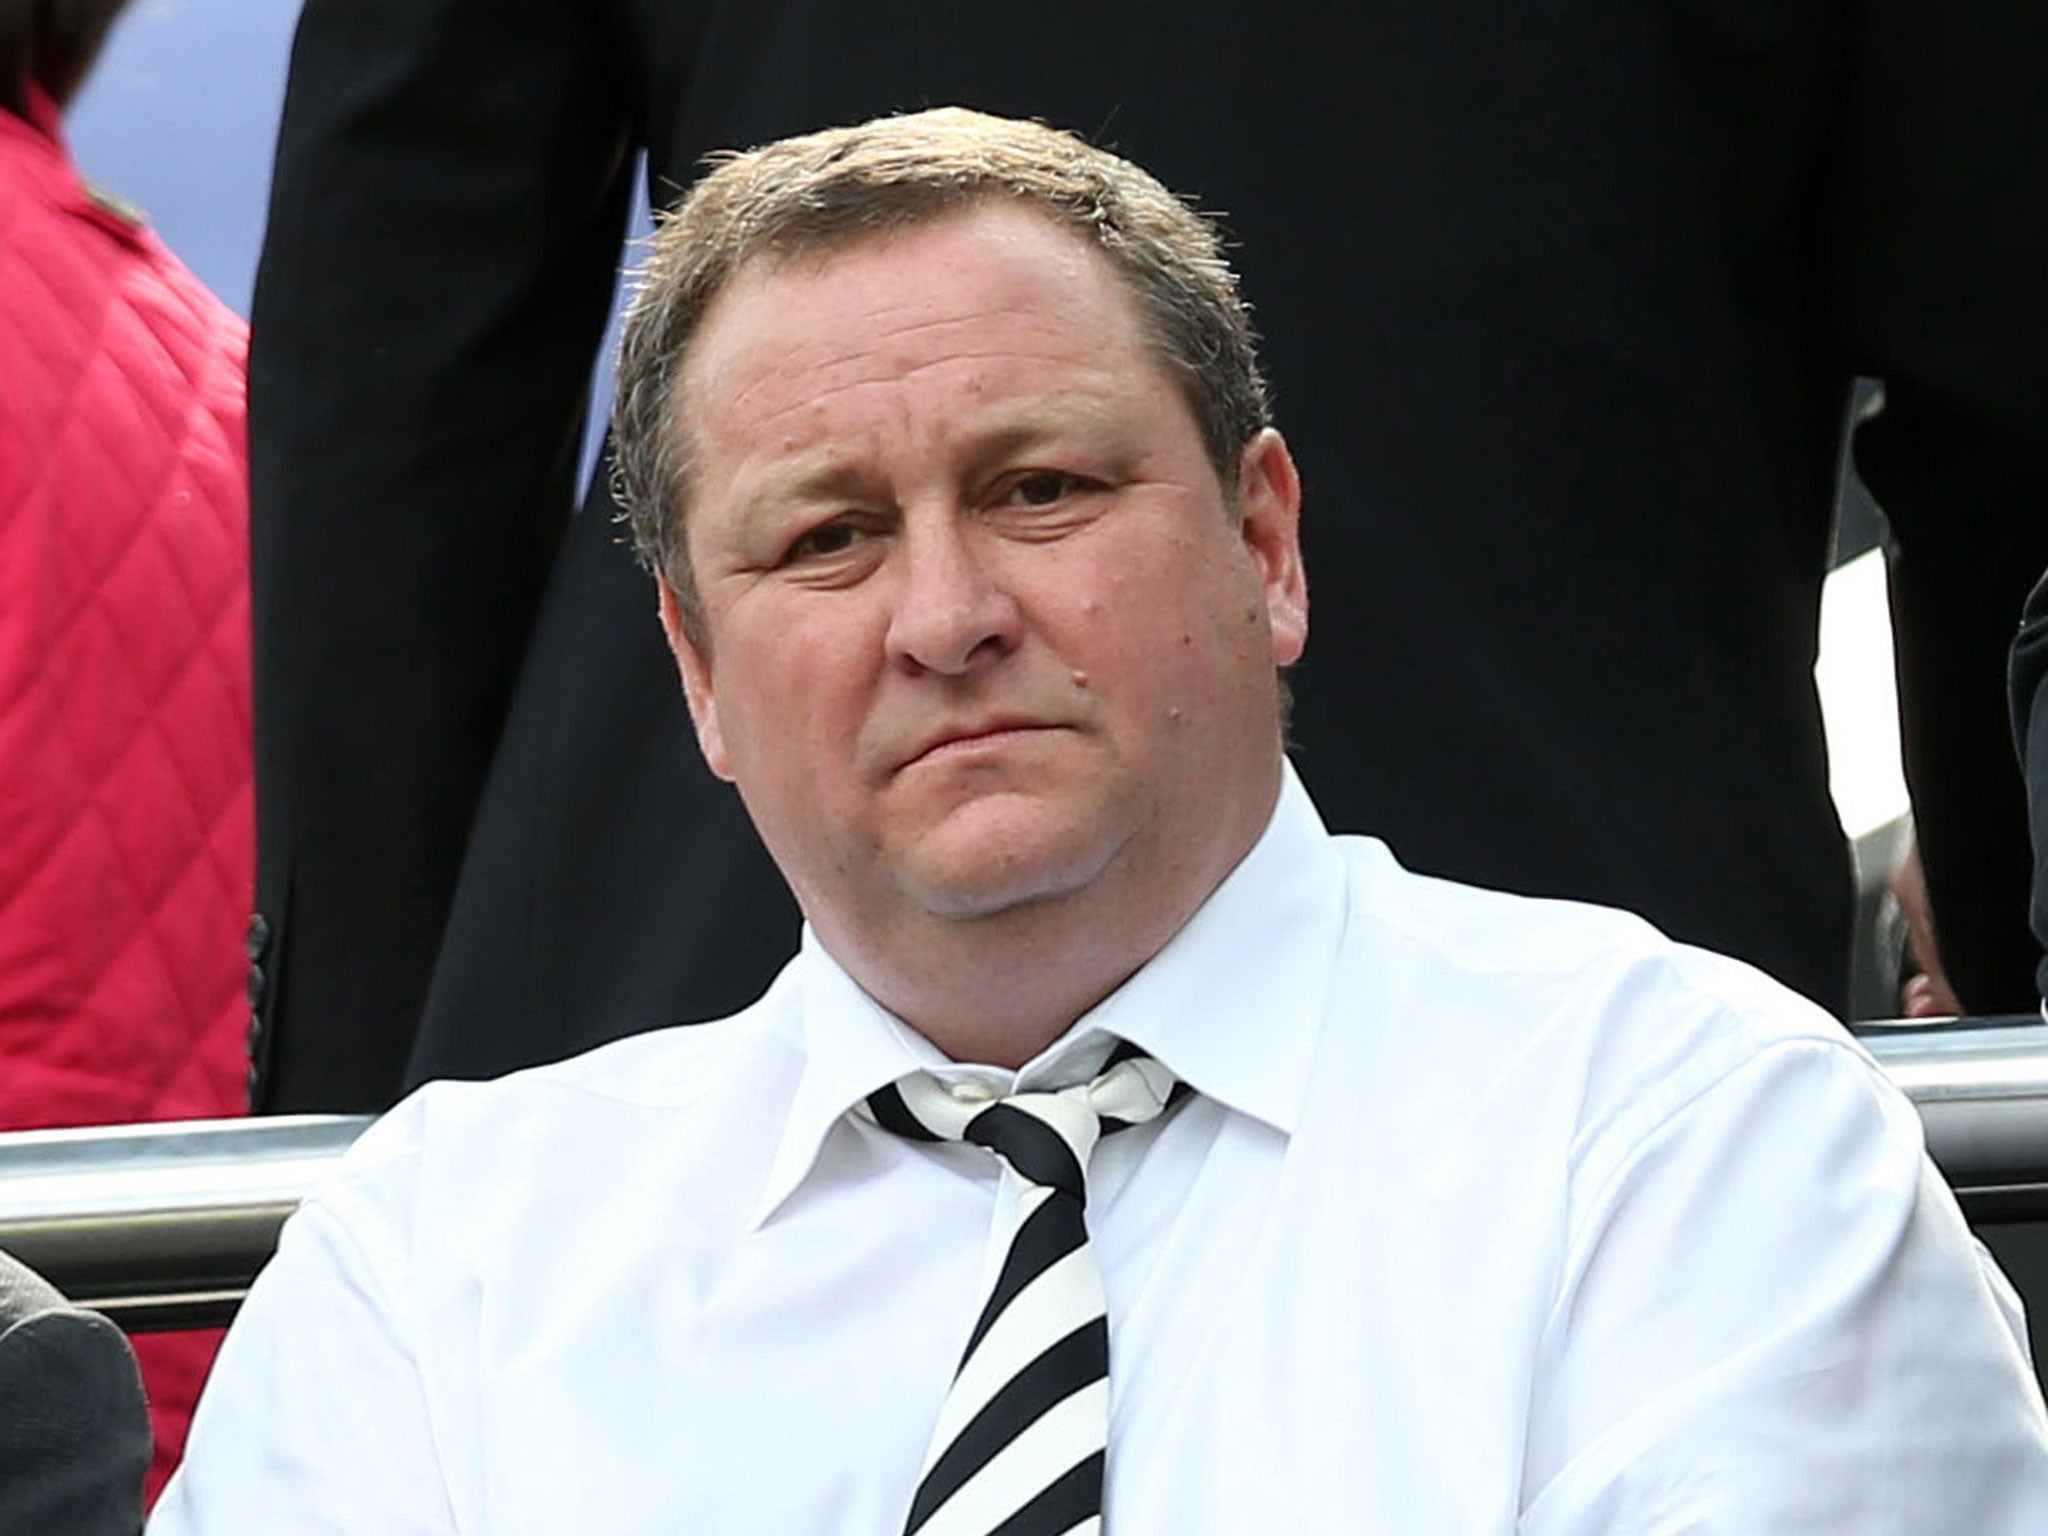 MPs are looking into conditions at Sports Direct, which is owned by Mike Ashley